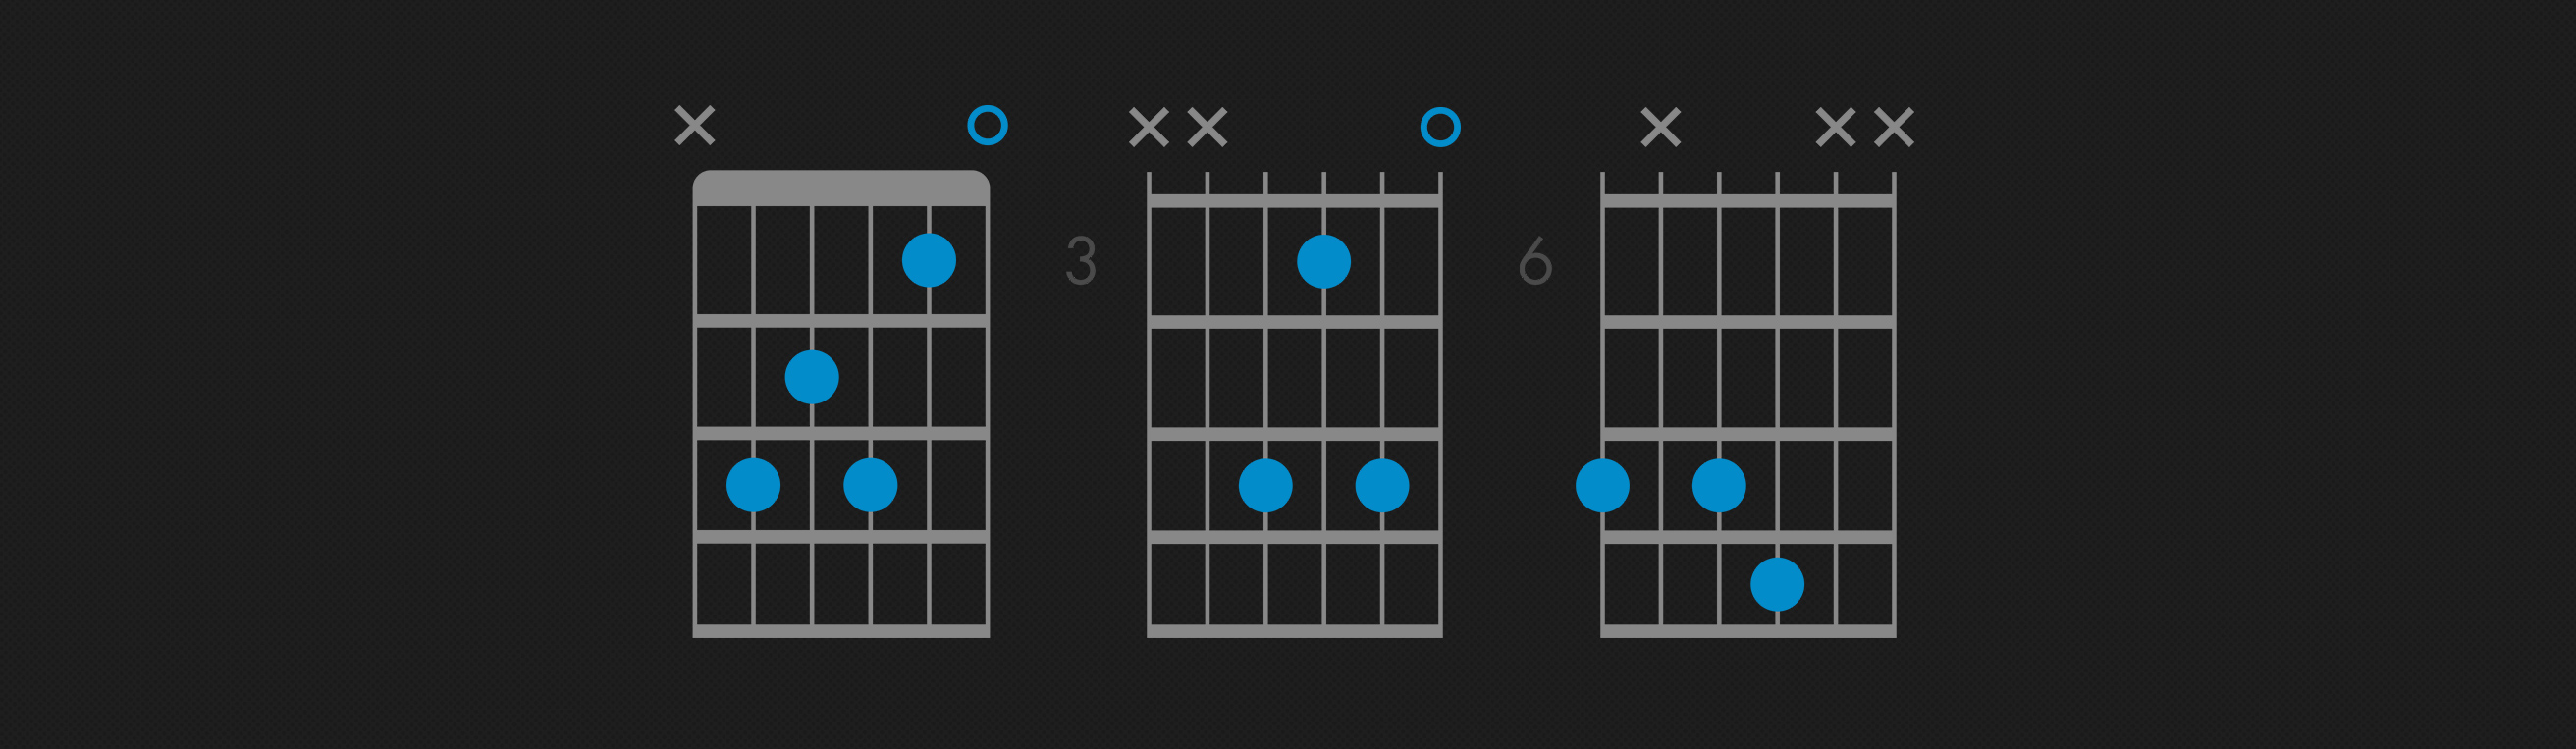 How to Play the C7 Chord